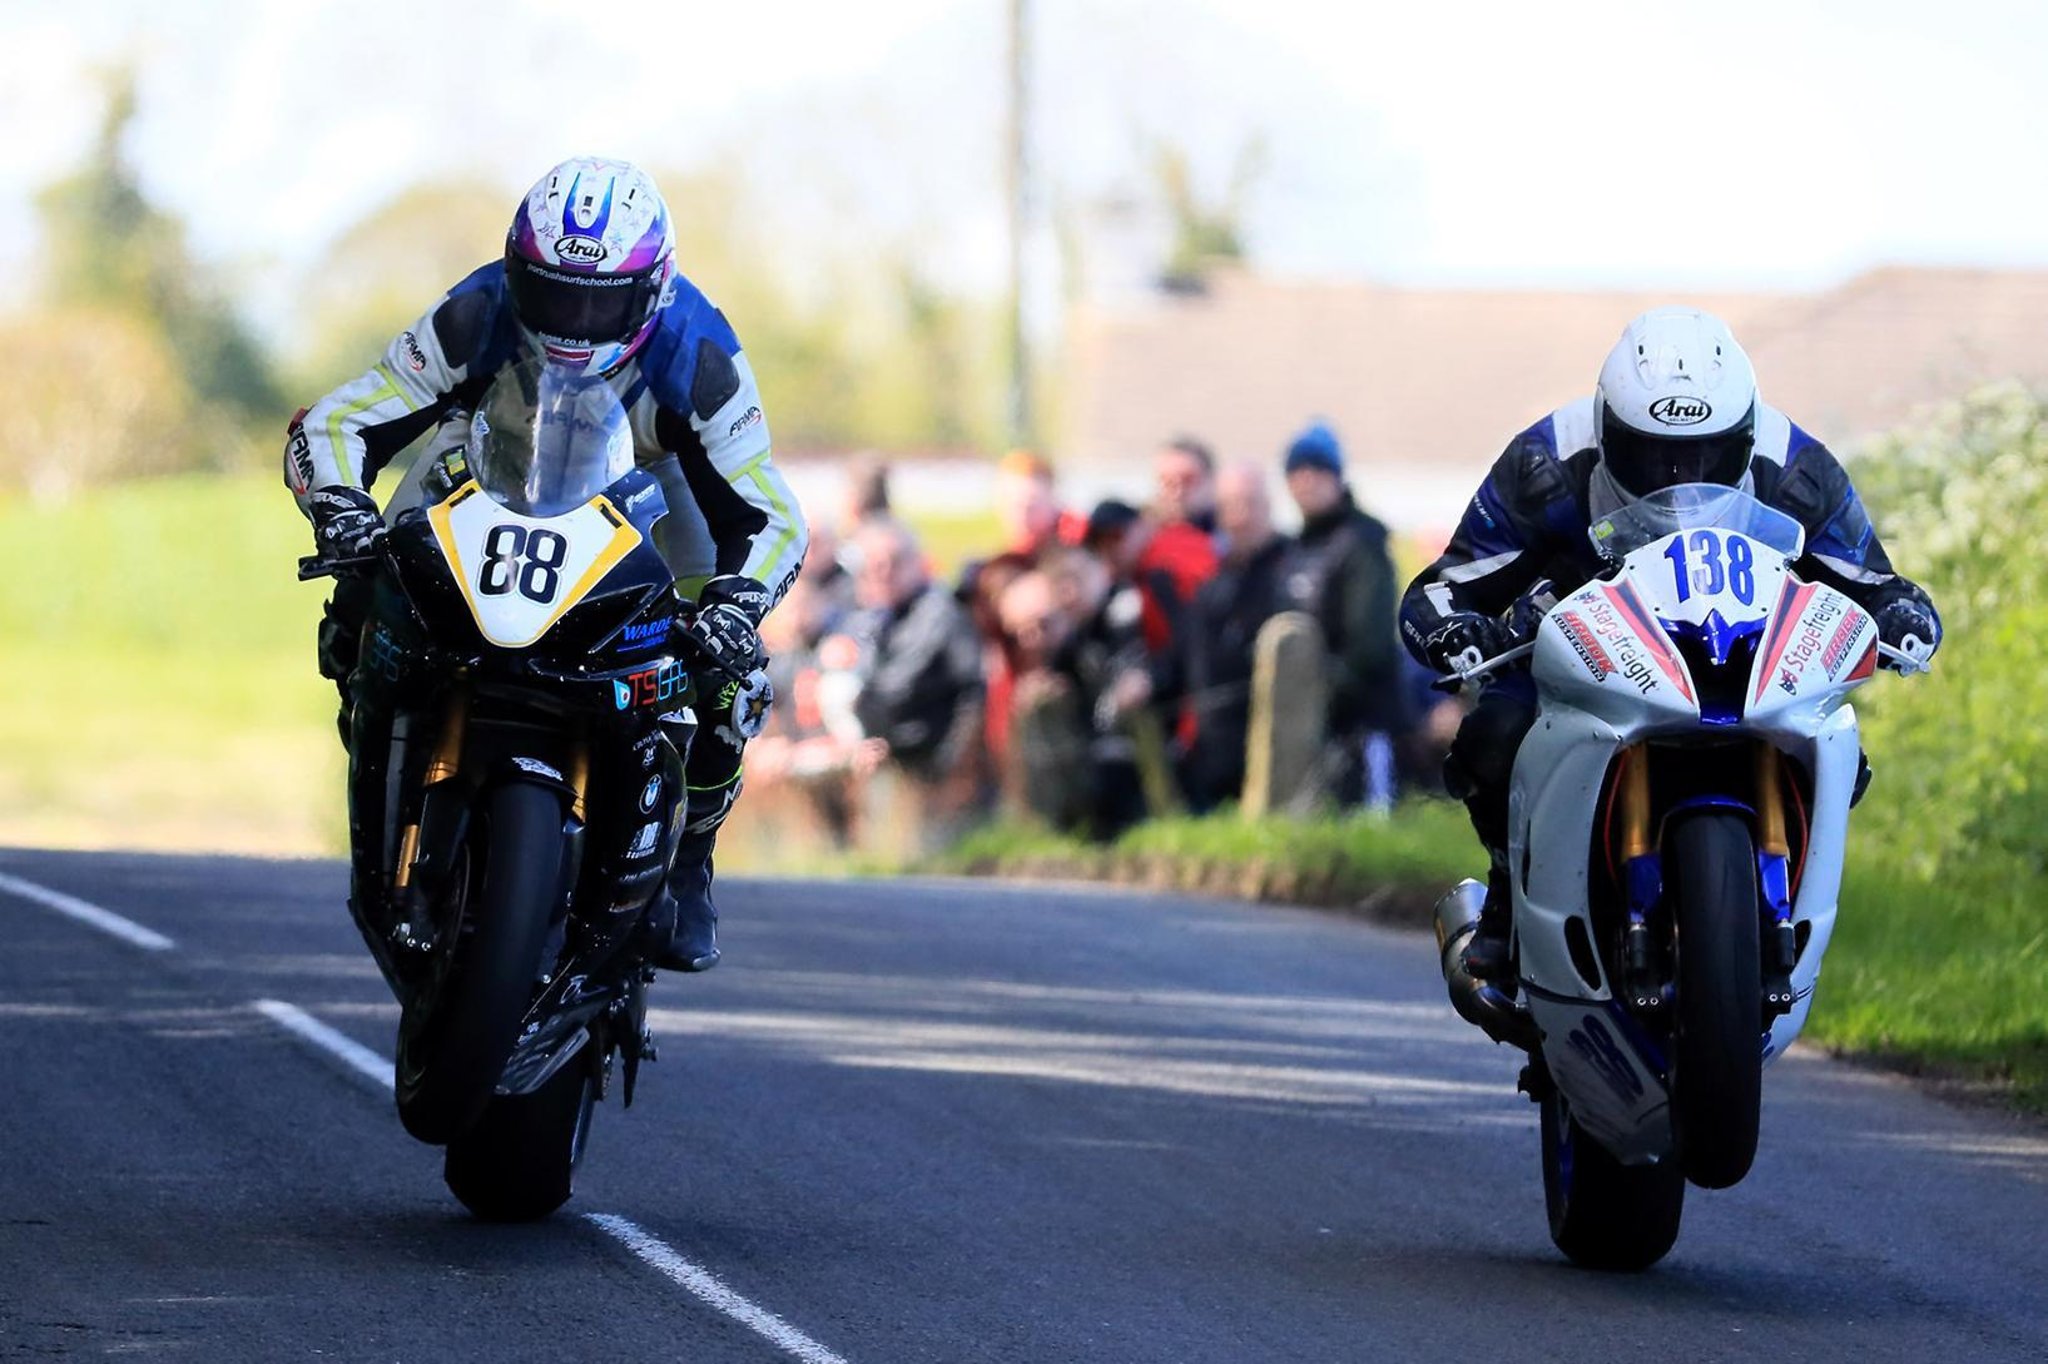 Tandragee 100: Practice, race schedule and roads closing times